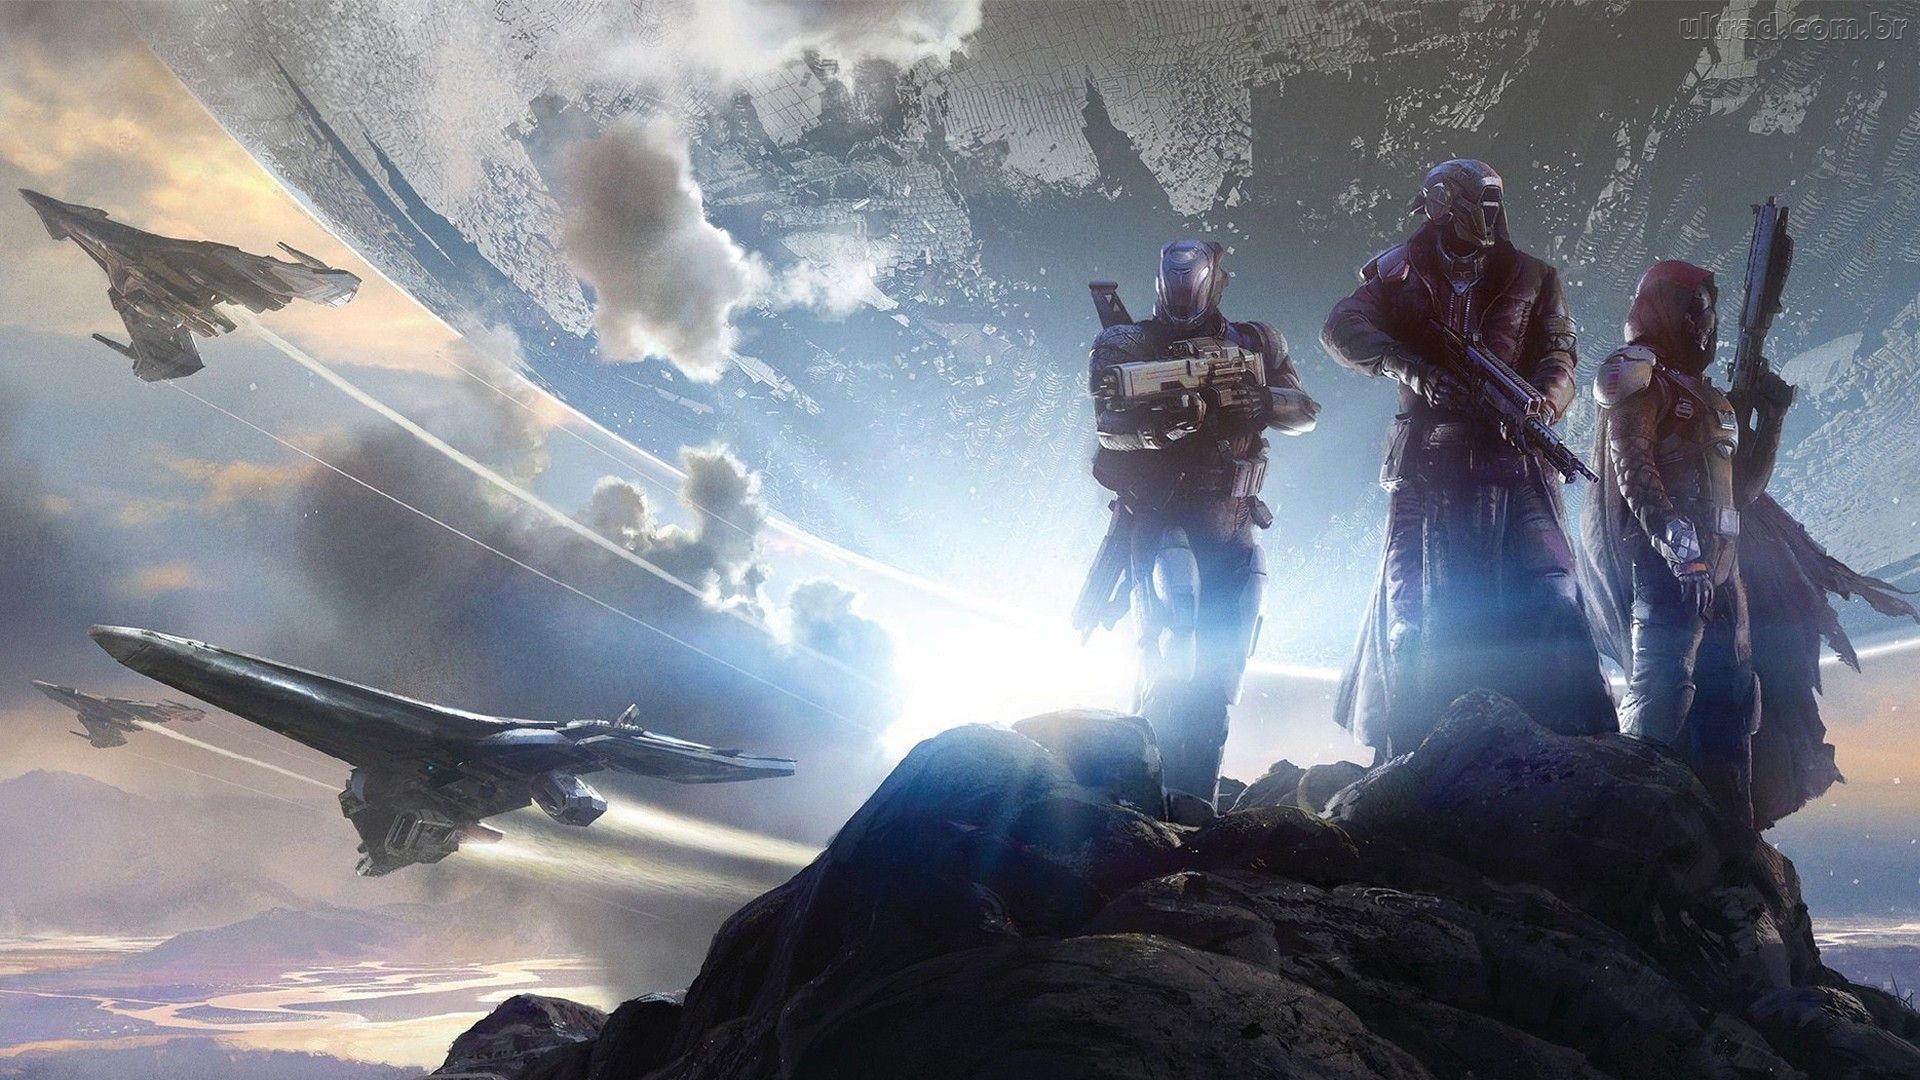 70 Awesome Destiny Wallpapers for your Computer, Tablet, or Phone